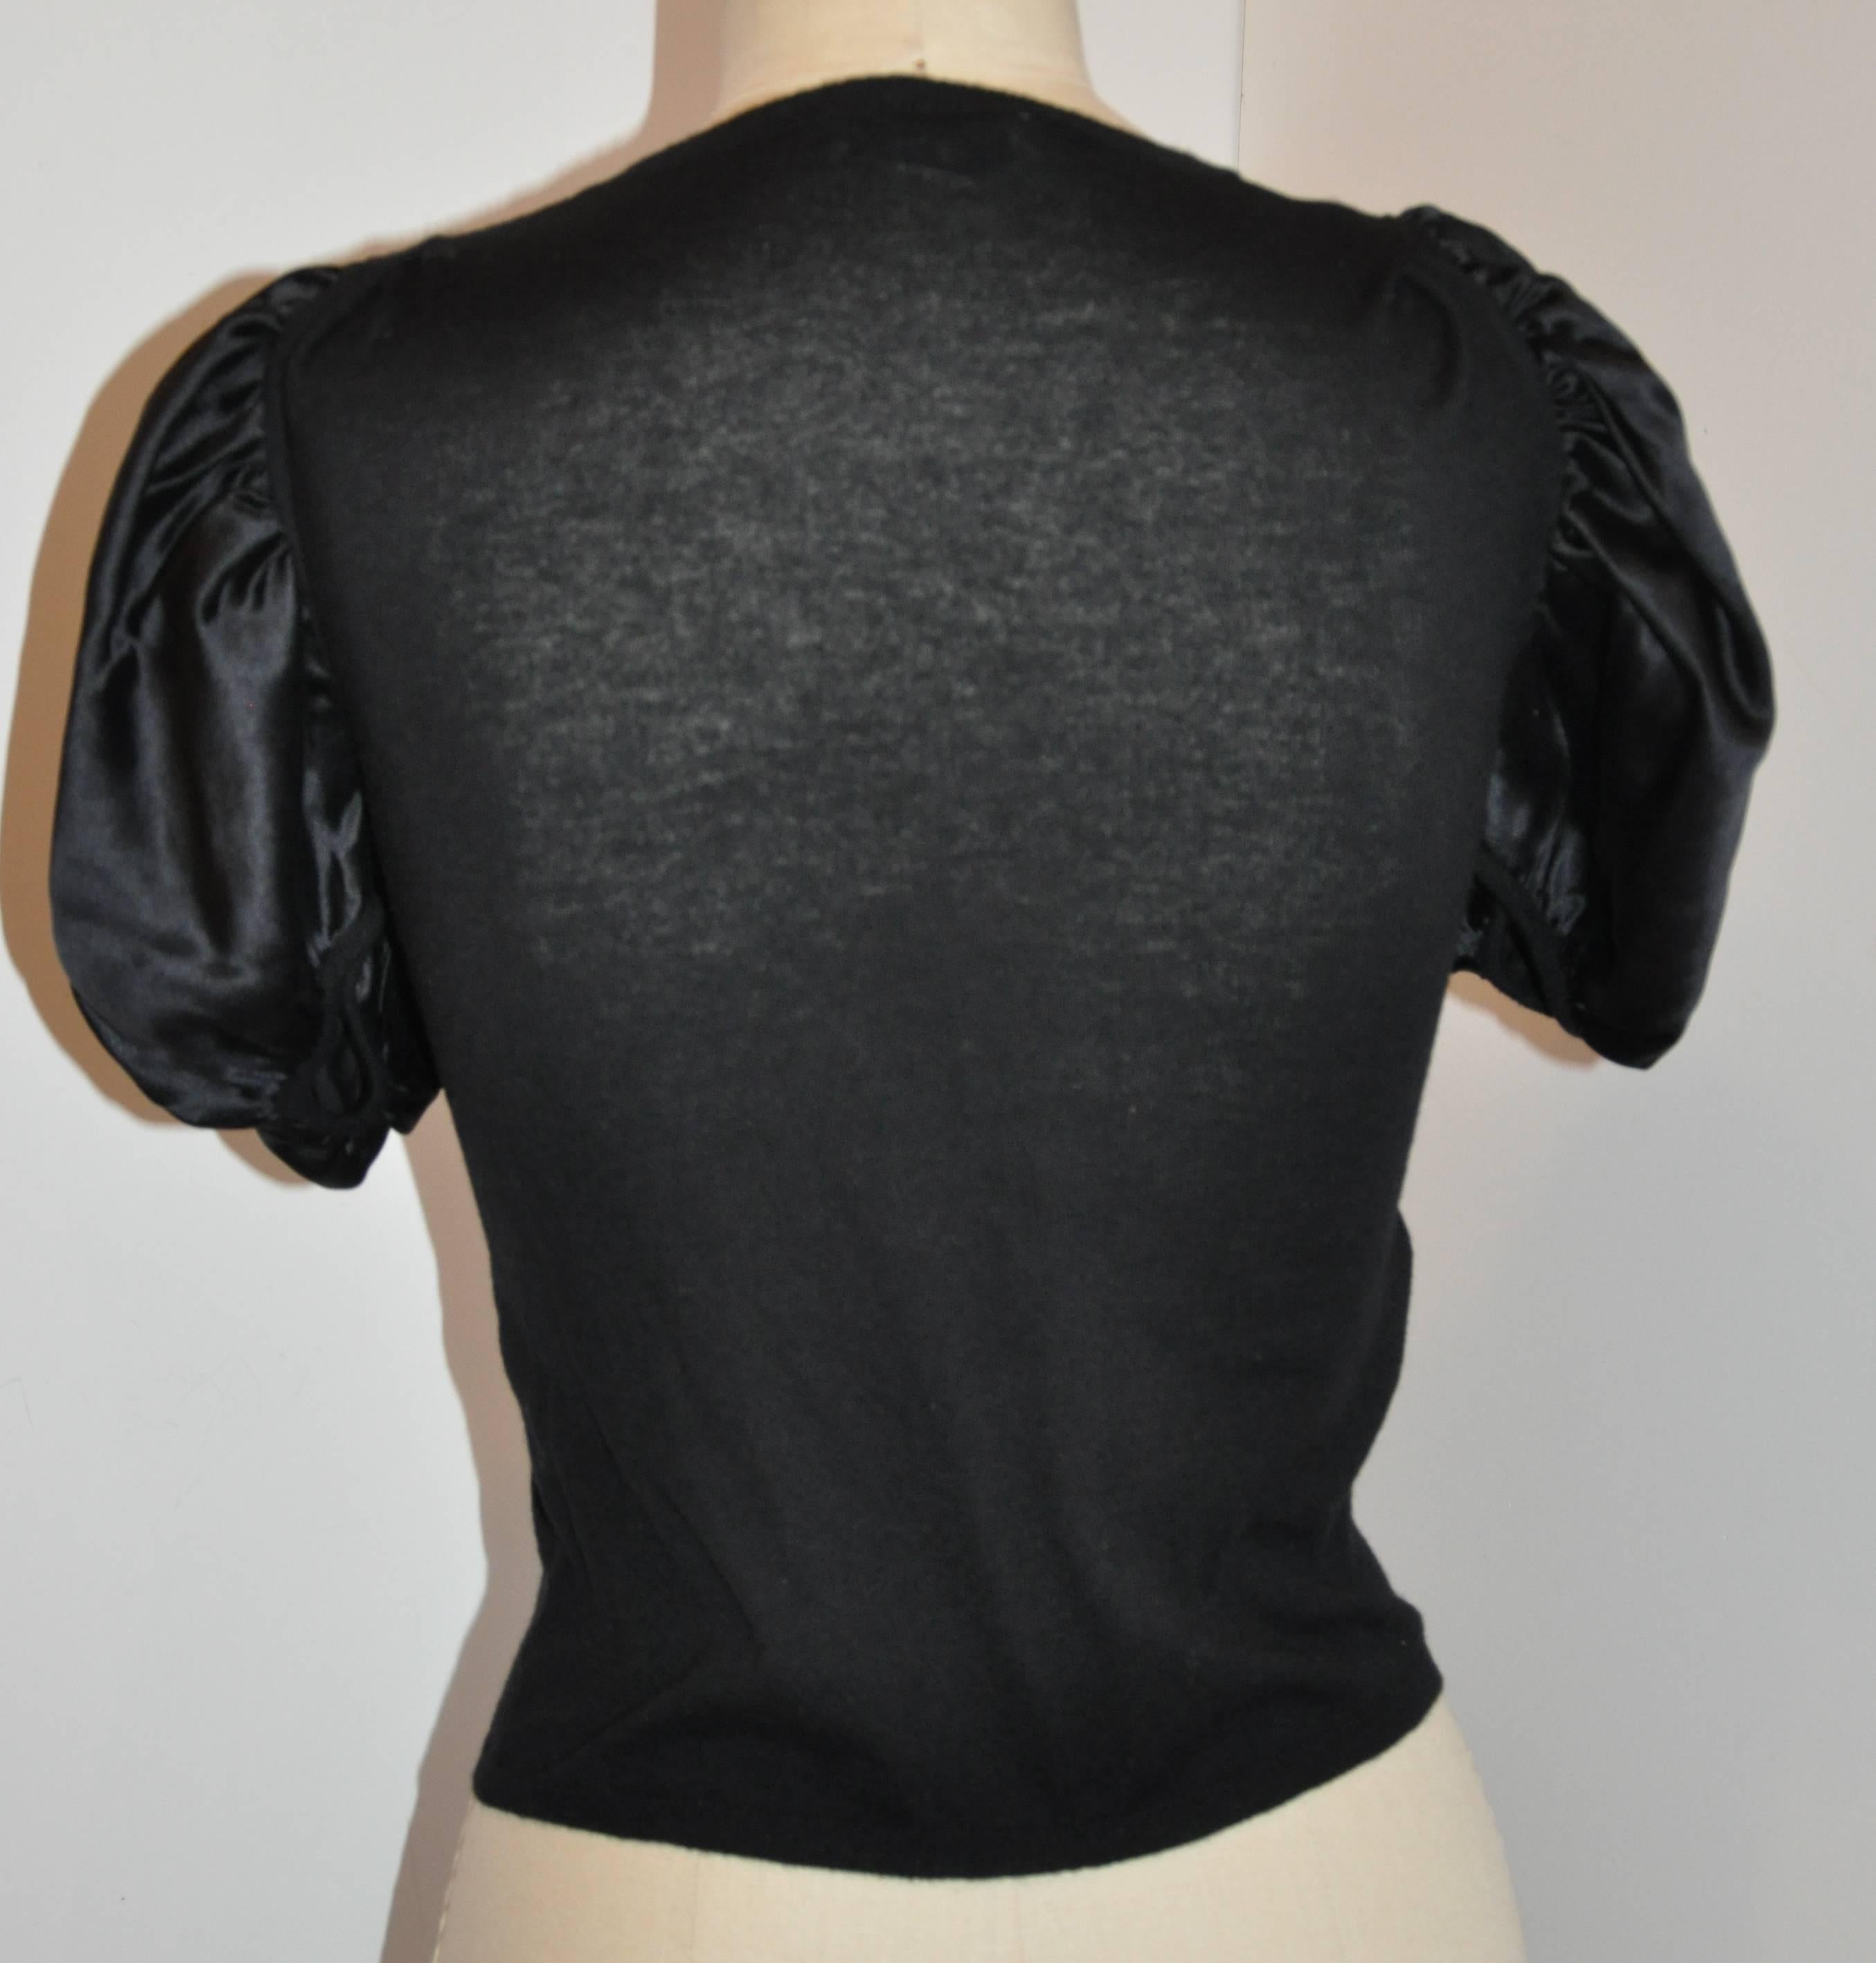         Prada's wonderfully elegant black silk with wool & cashmere blend crew neck pullover top measures 11 across the shoulder. The underarm circumference measures 34